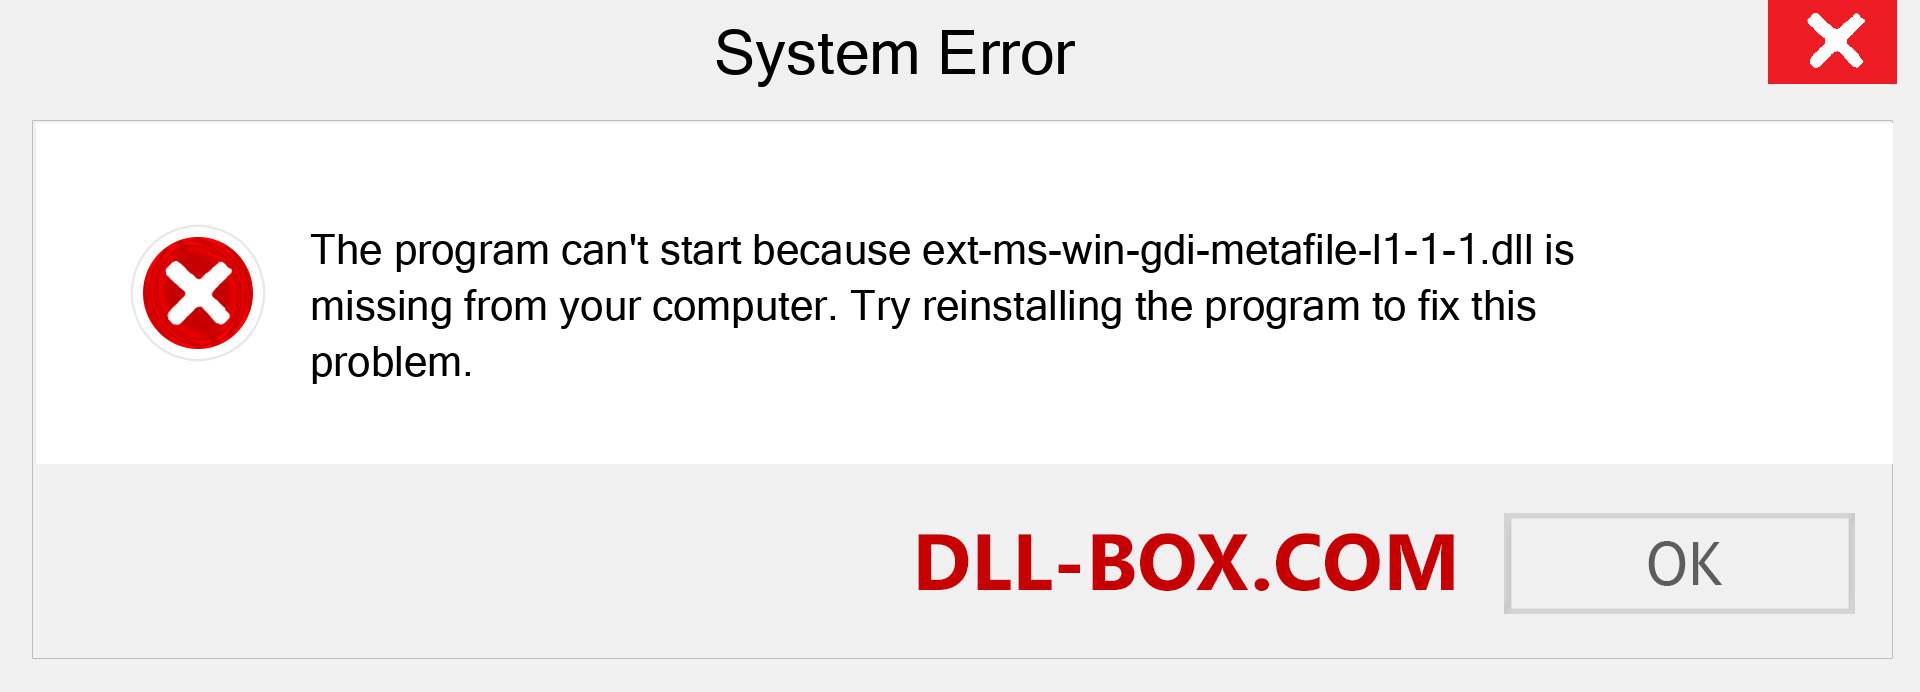  ext-ms-win-gdi-metafile-l1-1-1.dll file is missing?. Download for Windows 7, 8, 10 - Fix  ext-ms-win-gdi-metafile-l1-1-1 dll Missing Error on Windows, photos, images